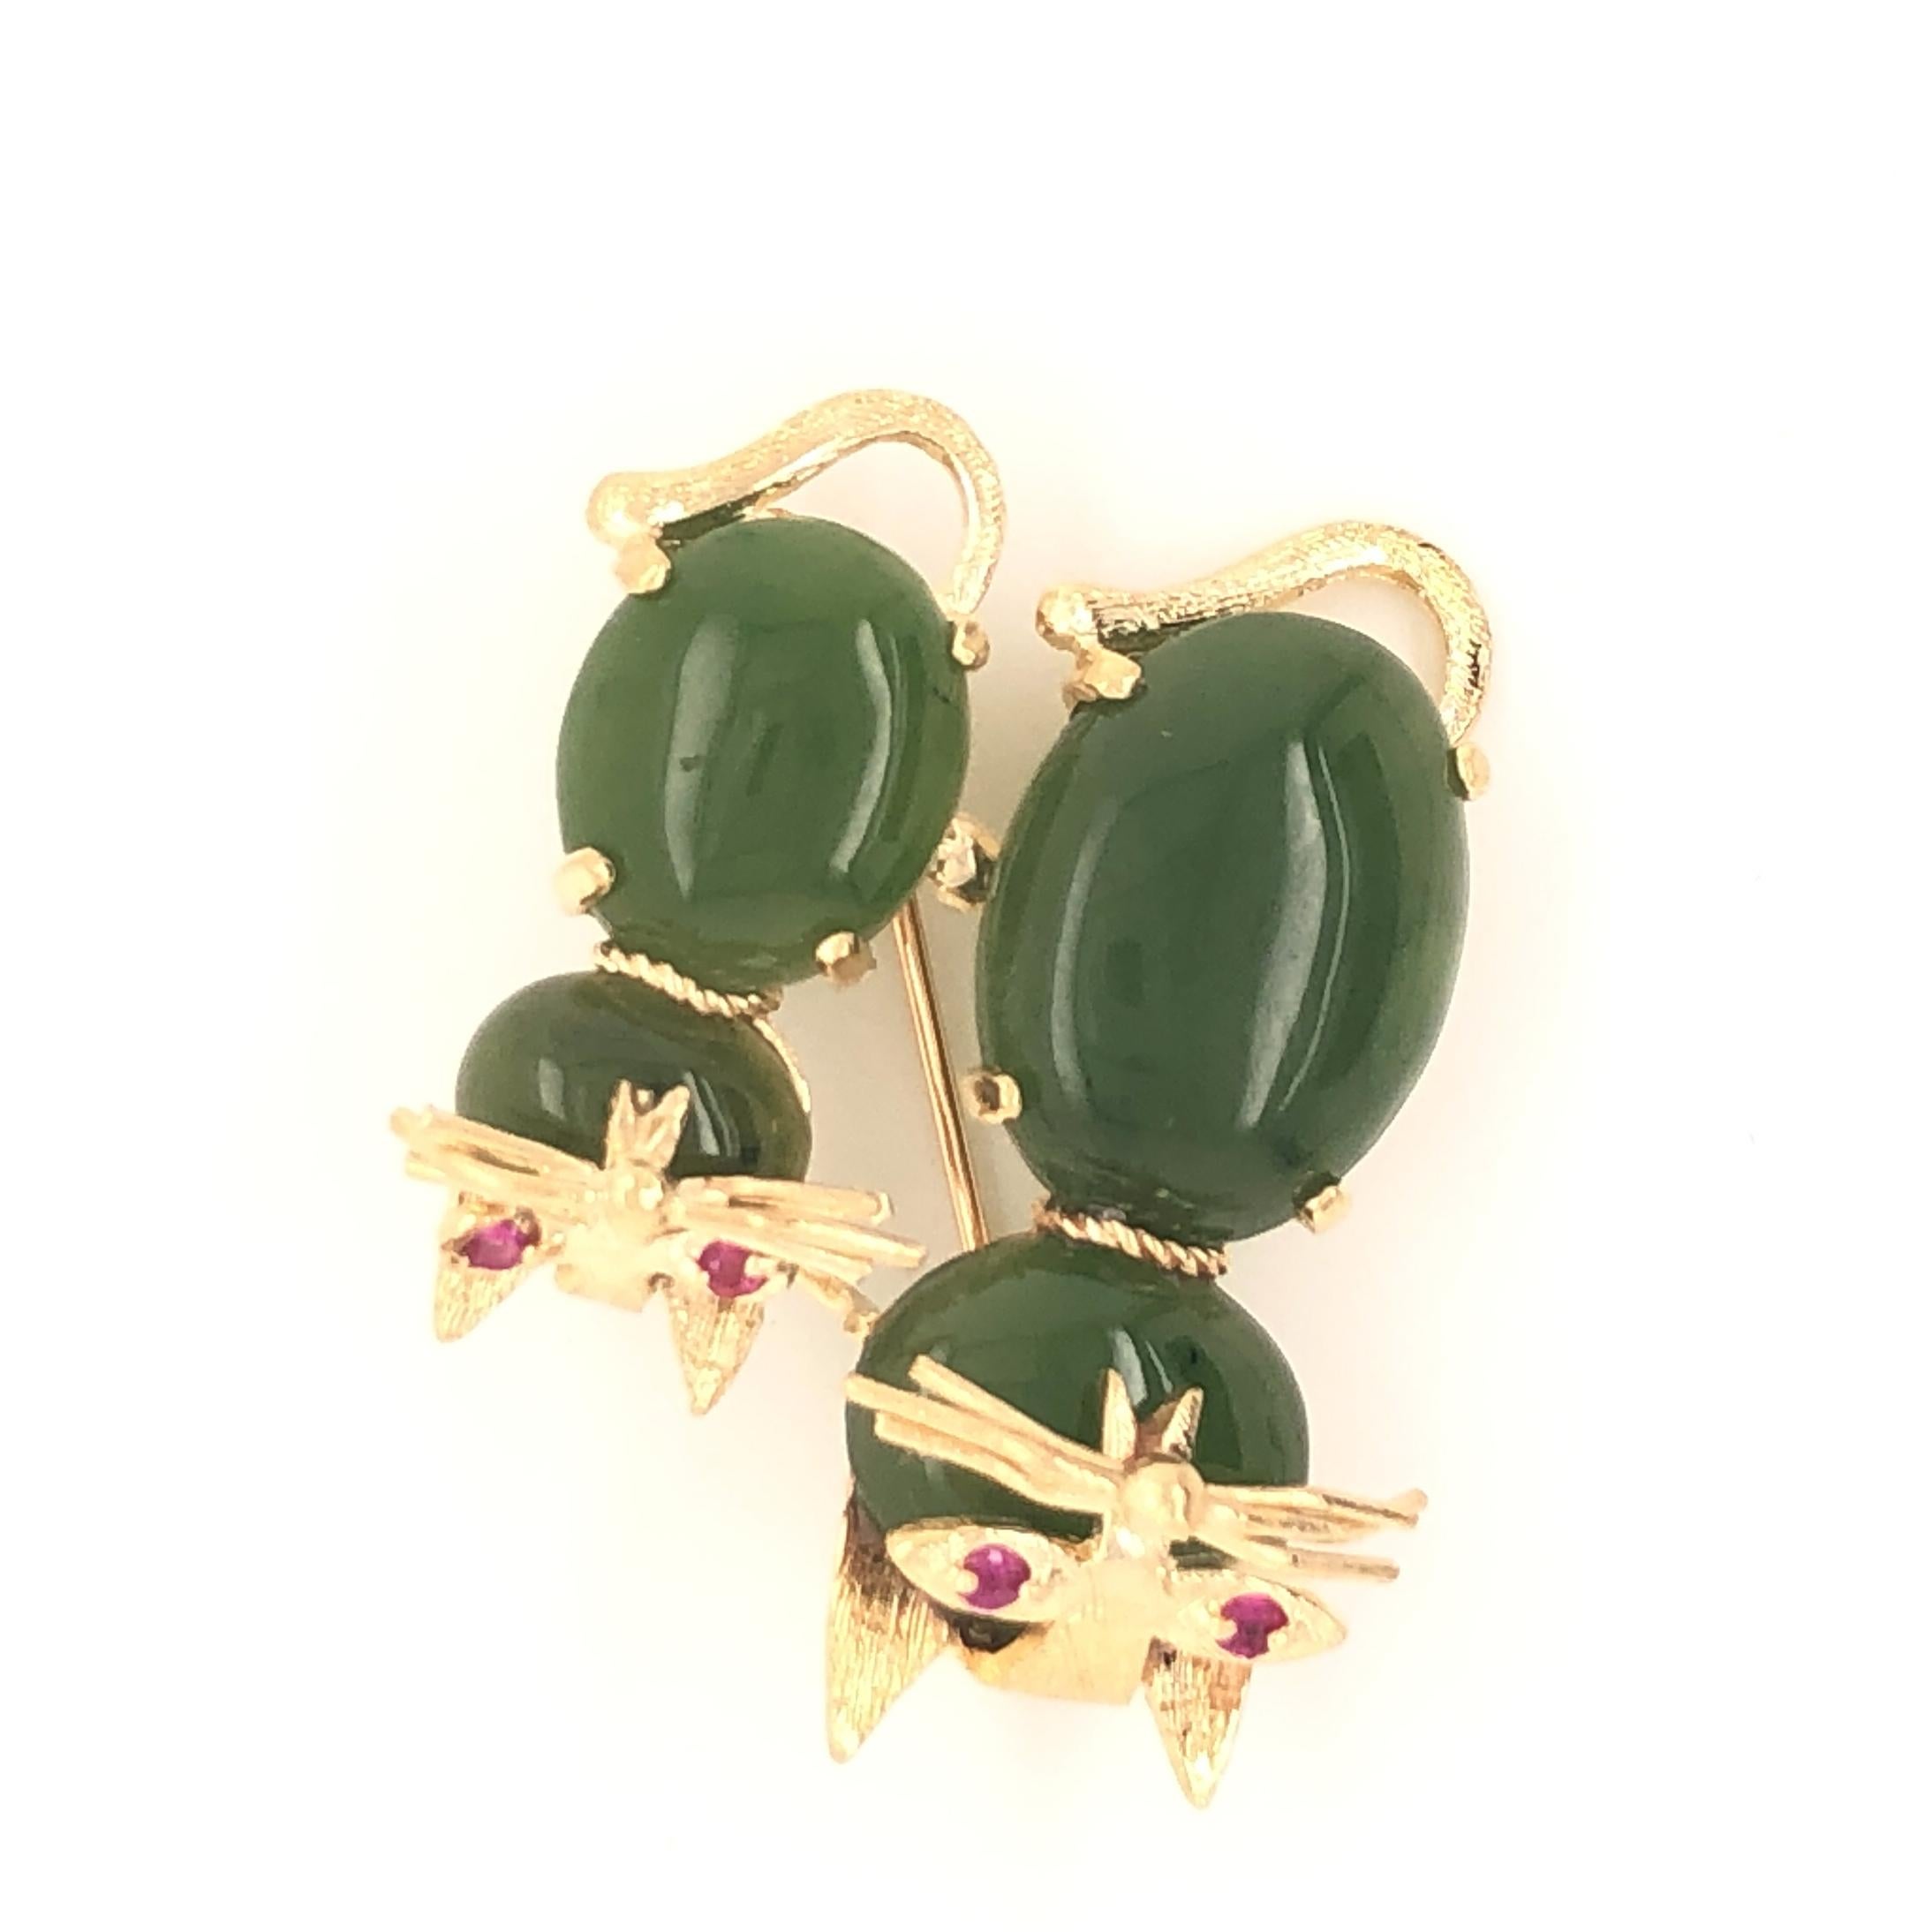 Adorable pair of cats 14k yellow gold brooch with nephrite jade bodies and ruby eyes. Unmarked gold acid tests as 14k.